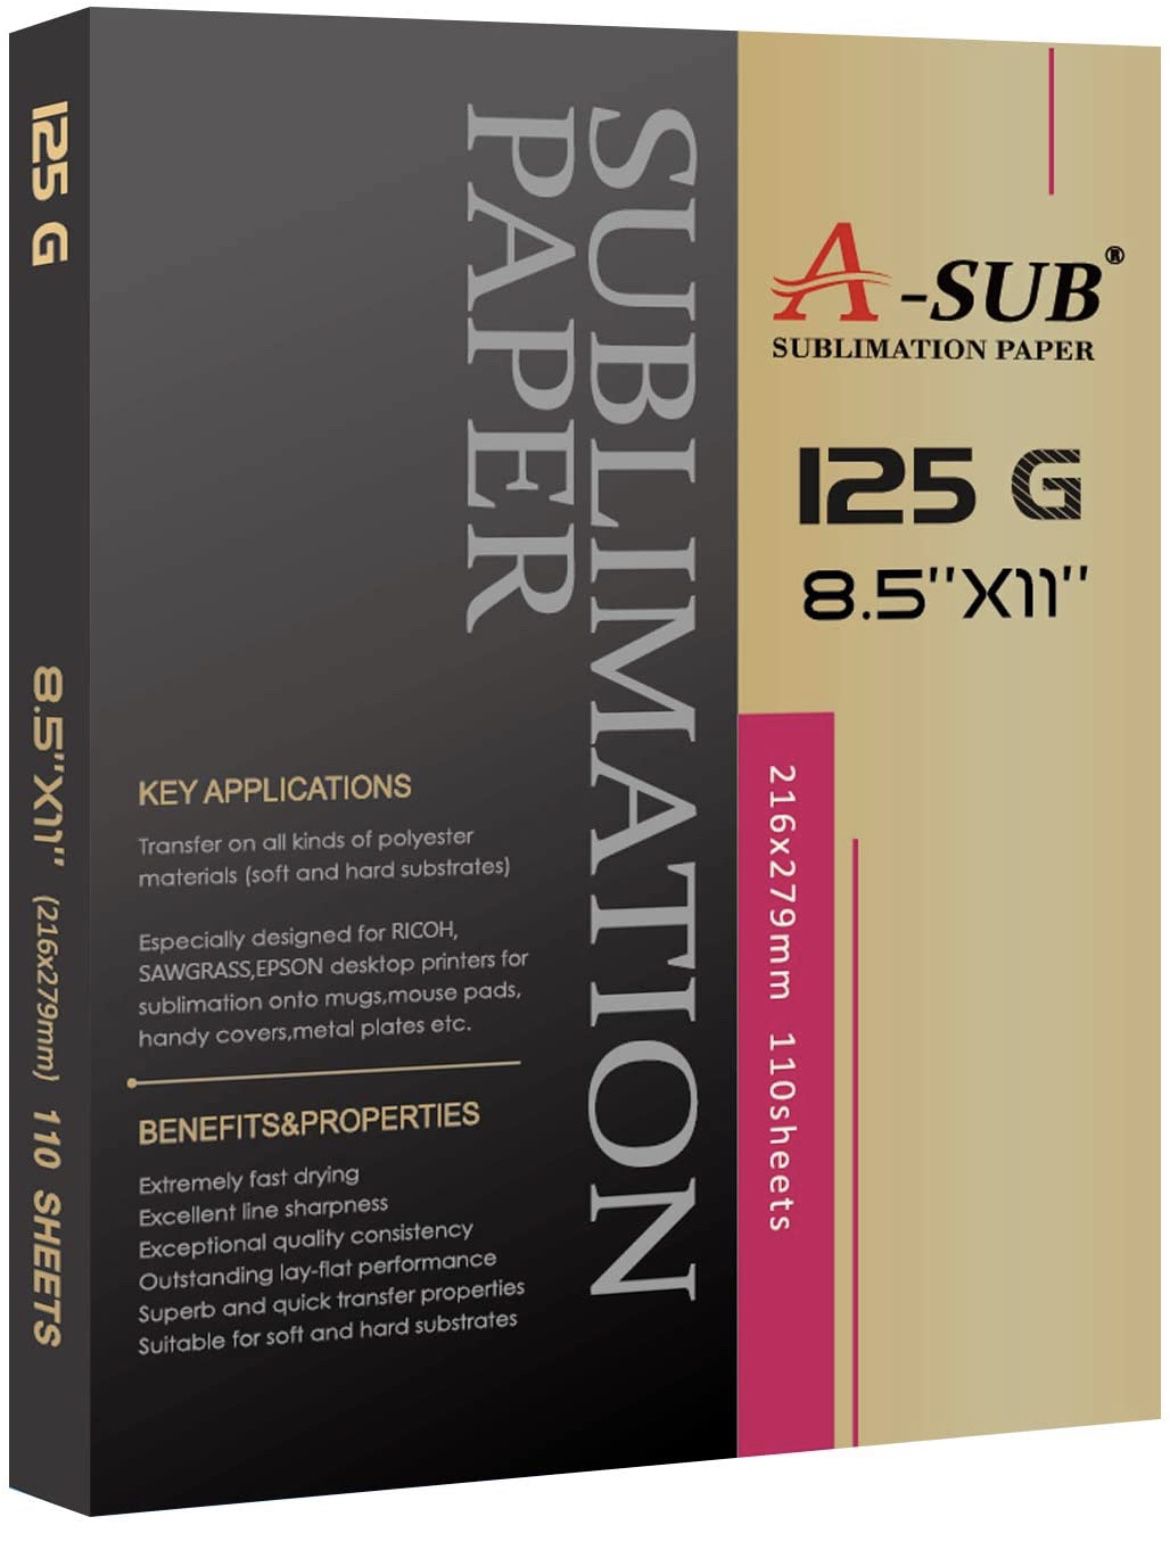 Sublimation Paper 8.5” X 11” (110 Sheets) For Any Inkjet Printer Which Match Sublimation 125G 